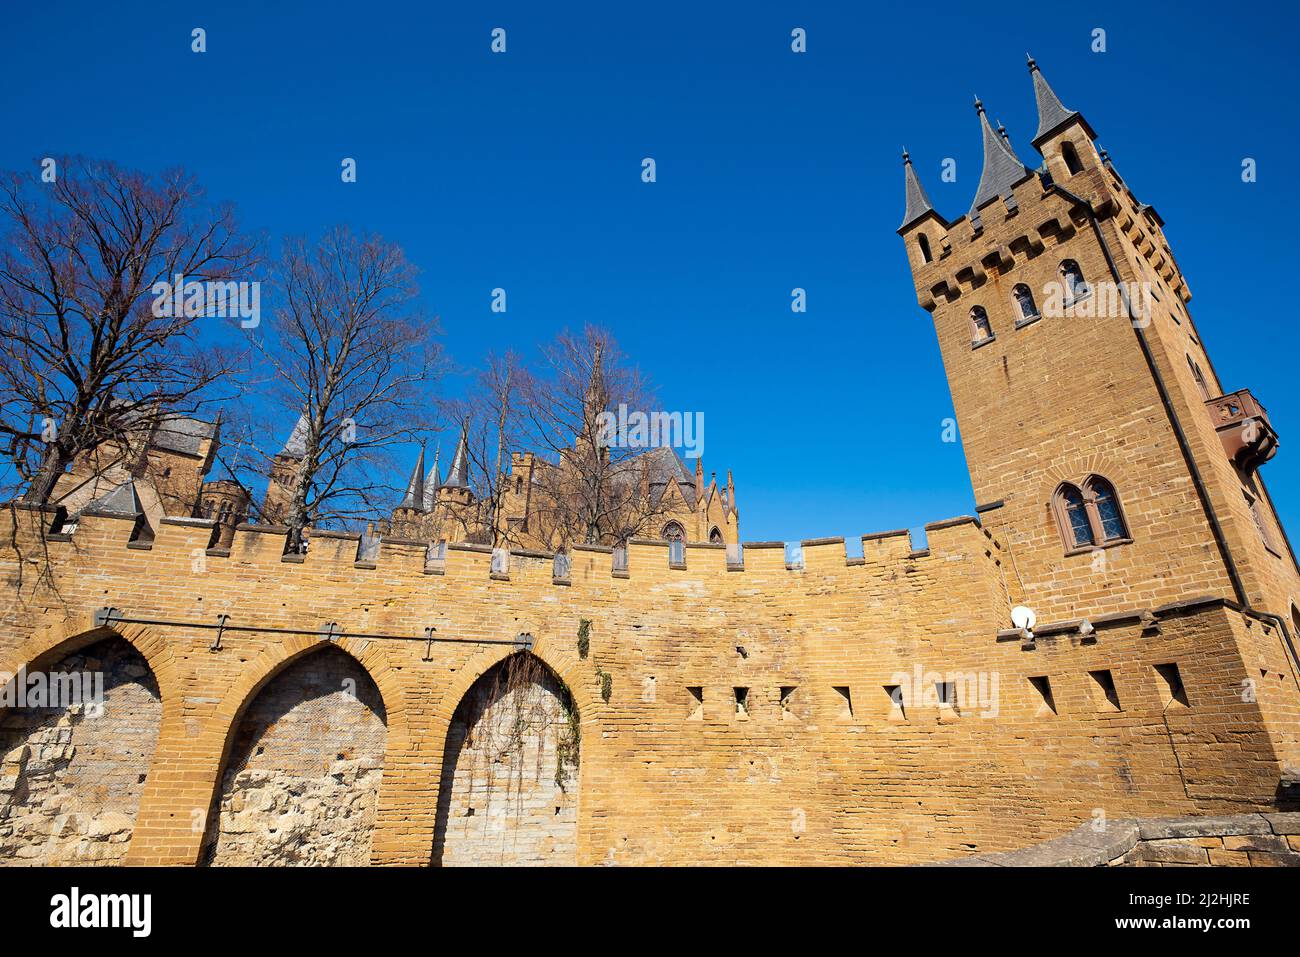 Gate tower. Hohenzollern Castle is a hilltop castle located on the mountain Hohenzollern, an isolated promontory of the Swabian Jura , central Baden-W Stock Photo